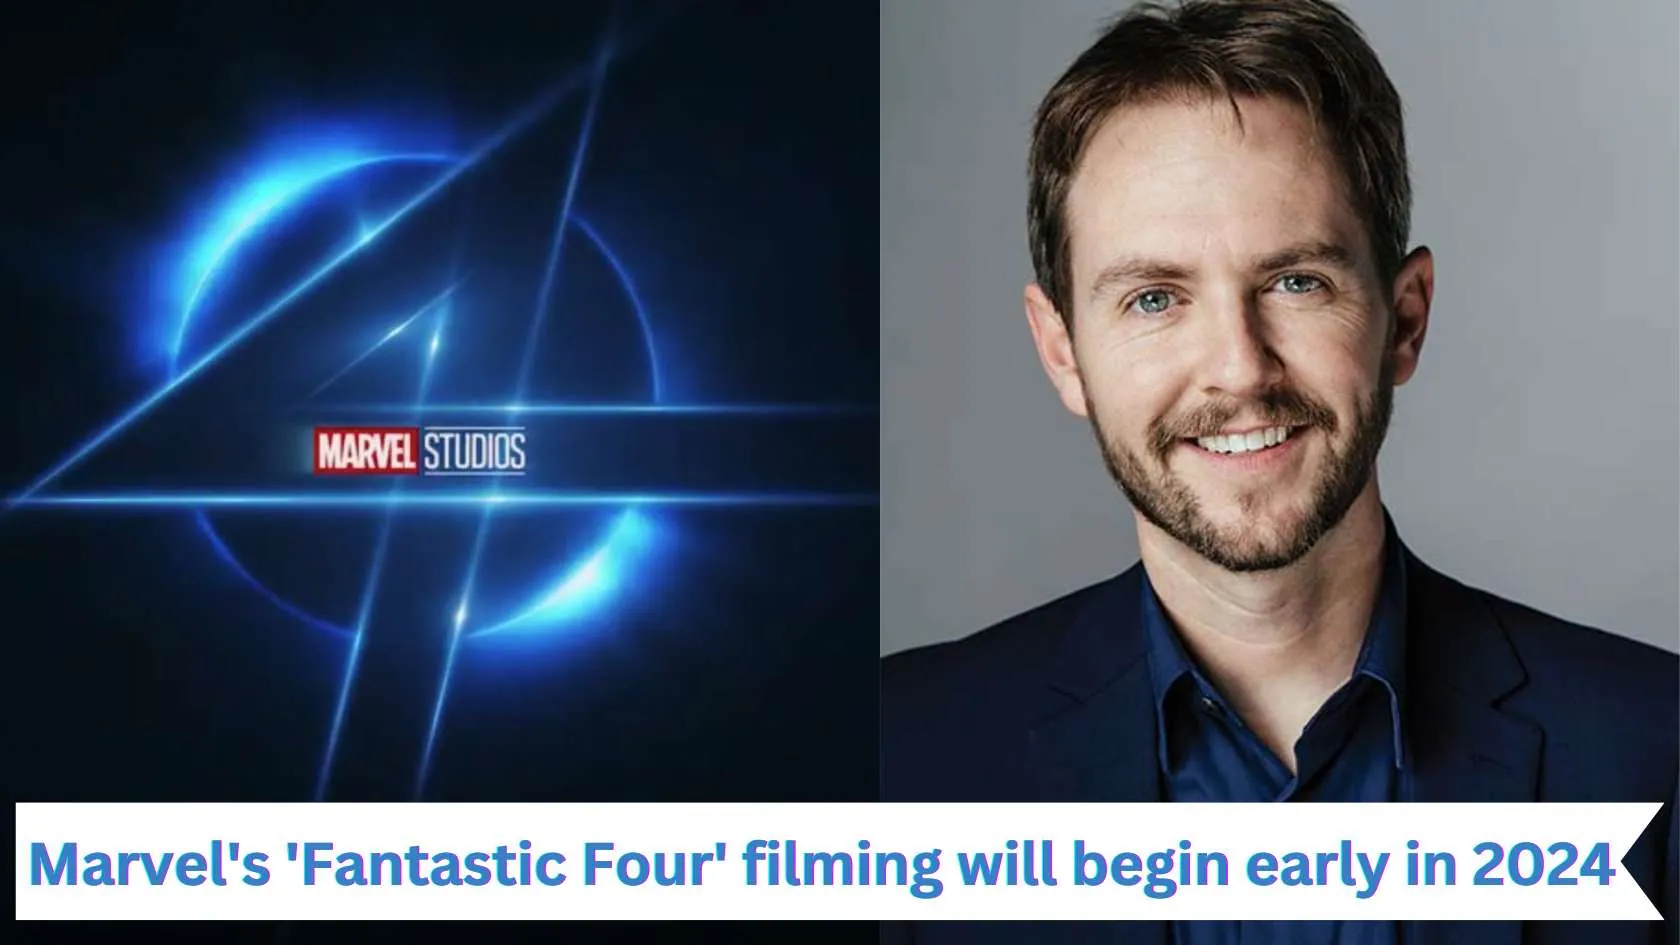 Marvel's 'Fantastic Four' filming will begin early in 2024